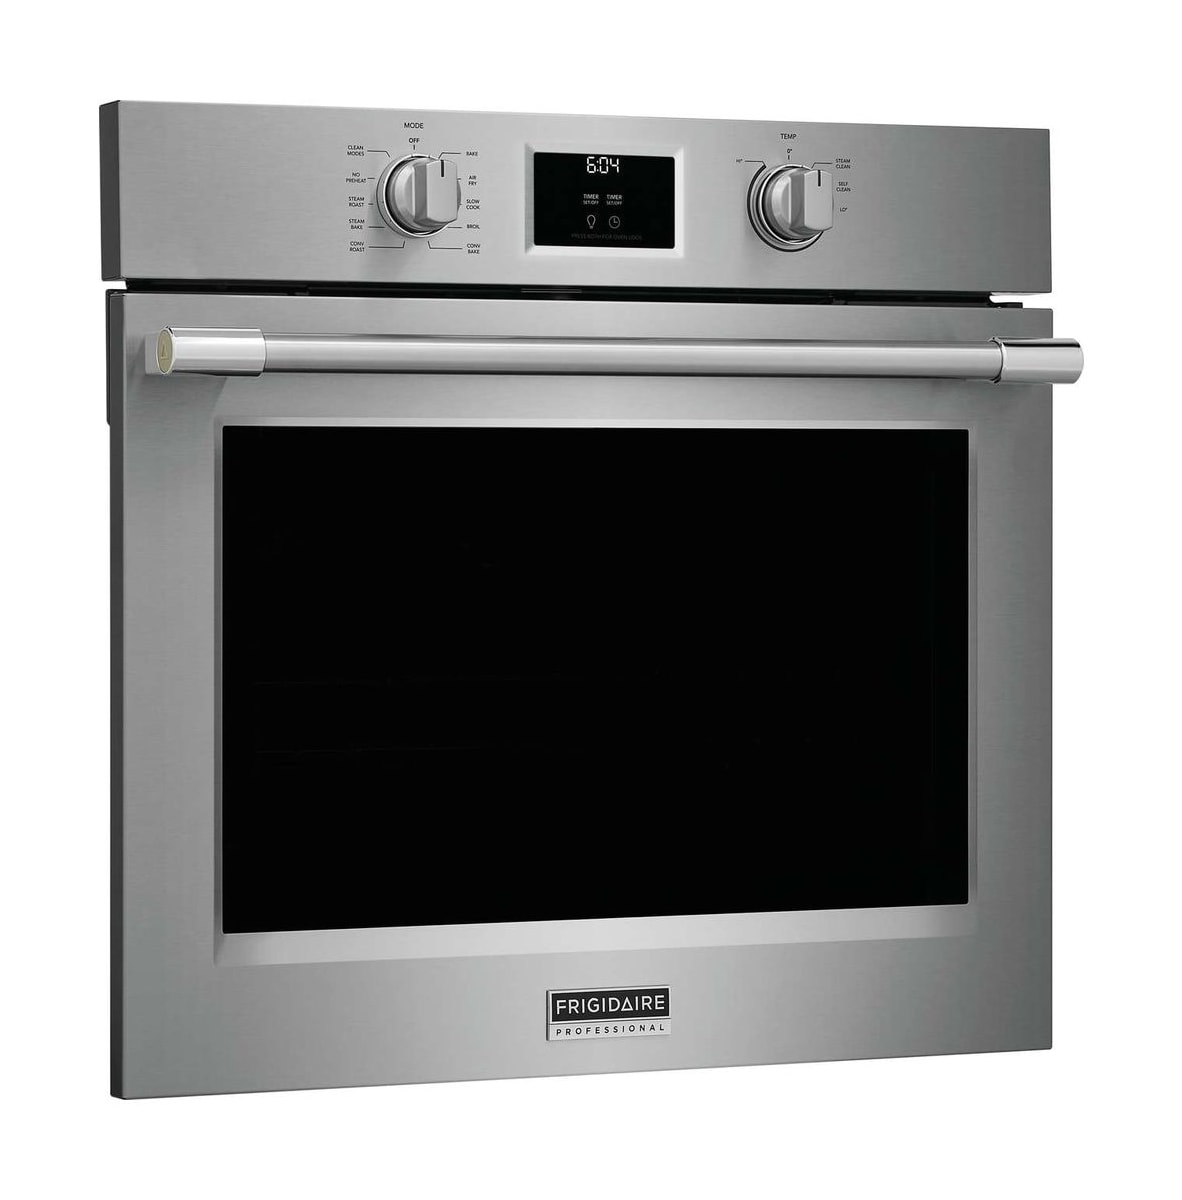 Frigidaire ReadyCook Air Fry Tray for 24 in. Wall Oven - Stainless Steel